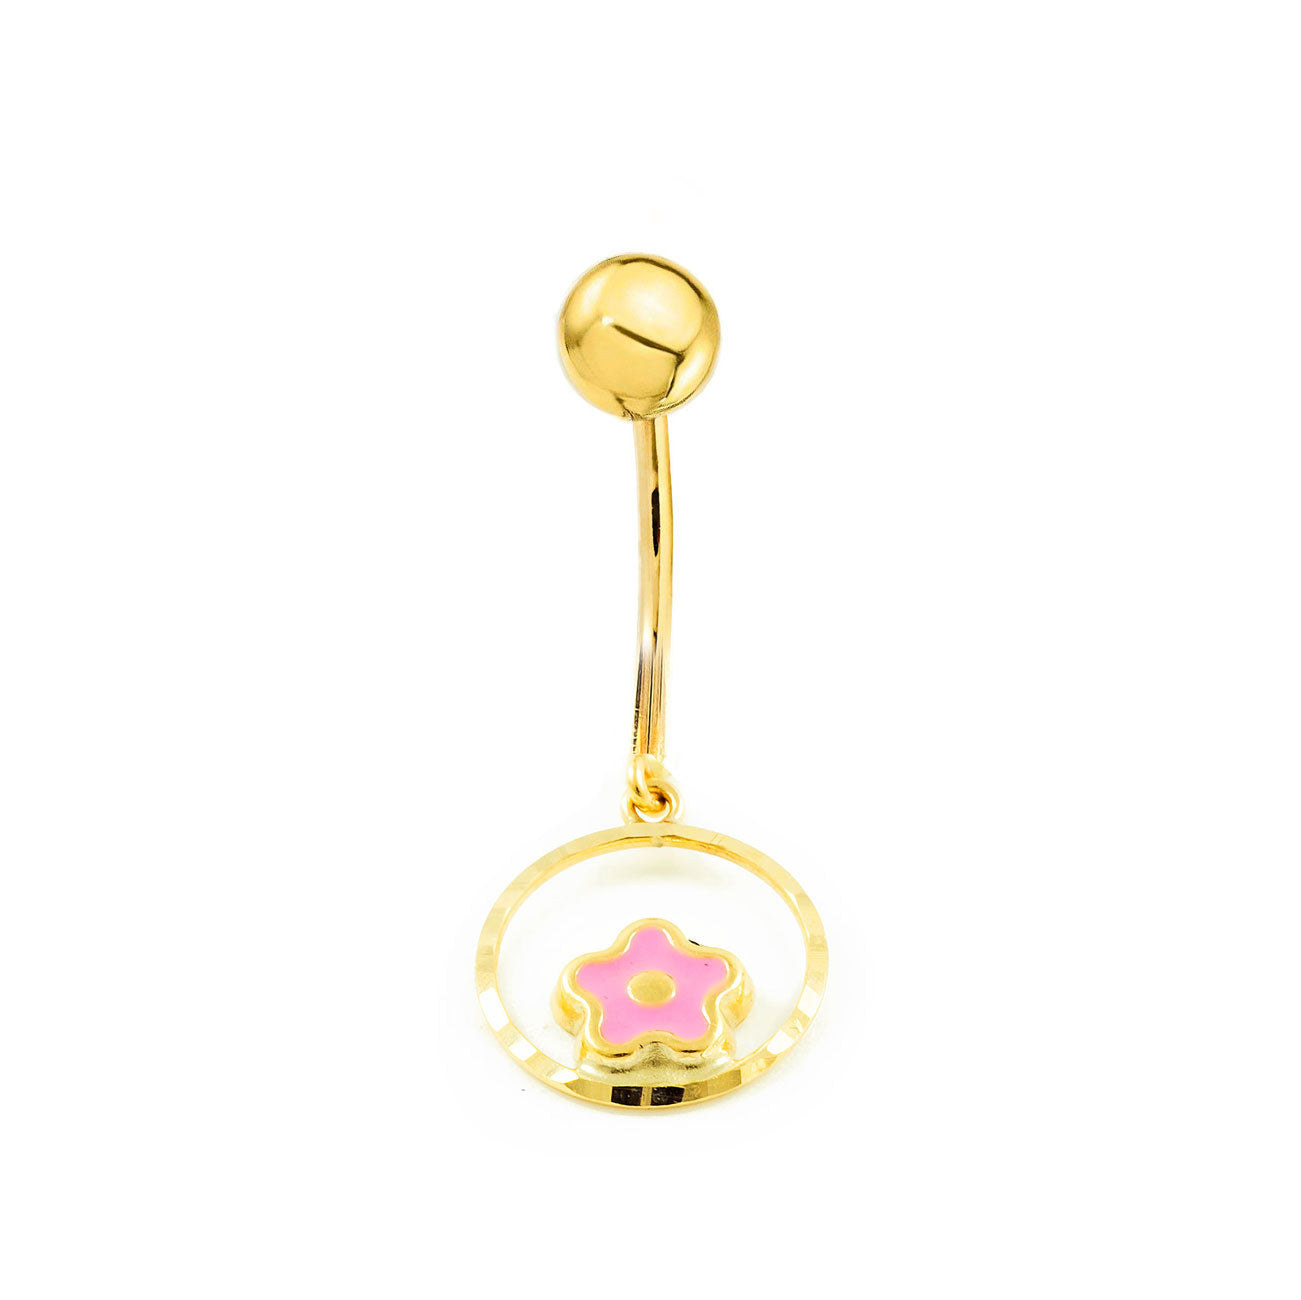 9K Yellow Gold Navel Piercing with Shiny Pink Flower Enamel